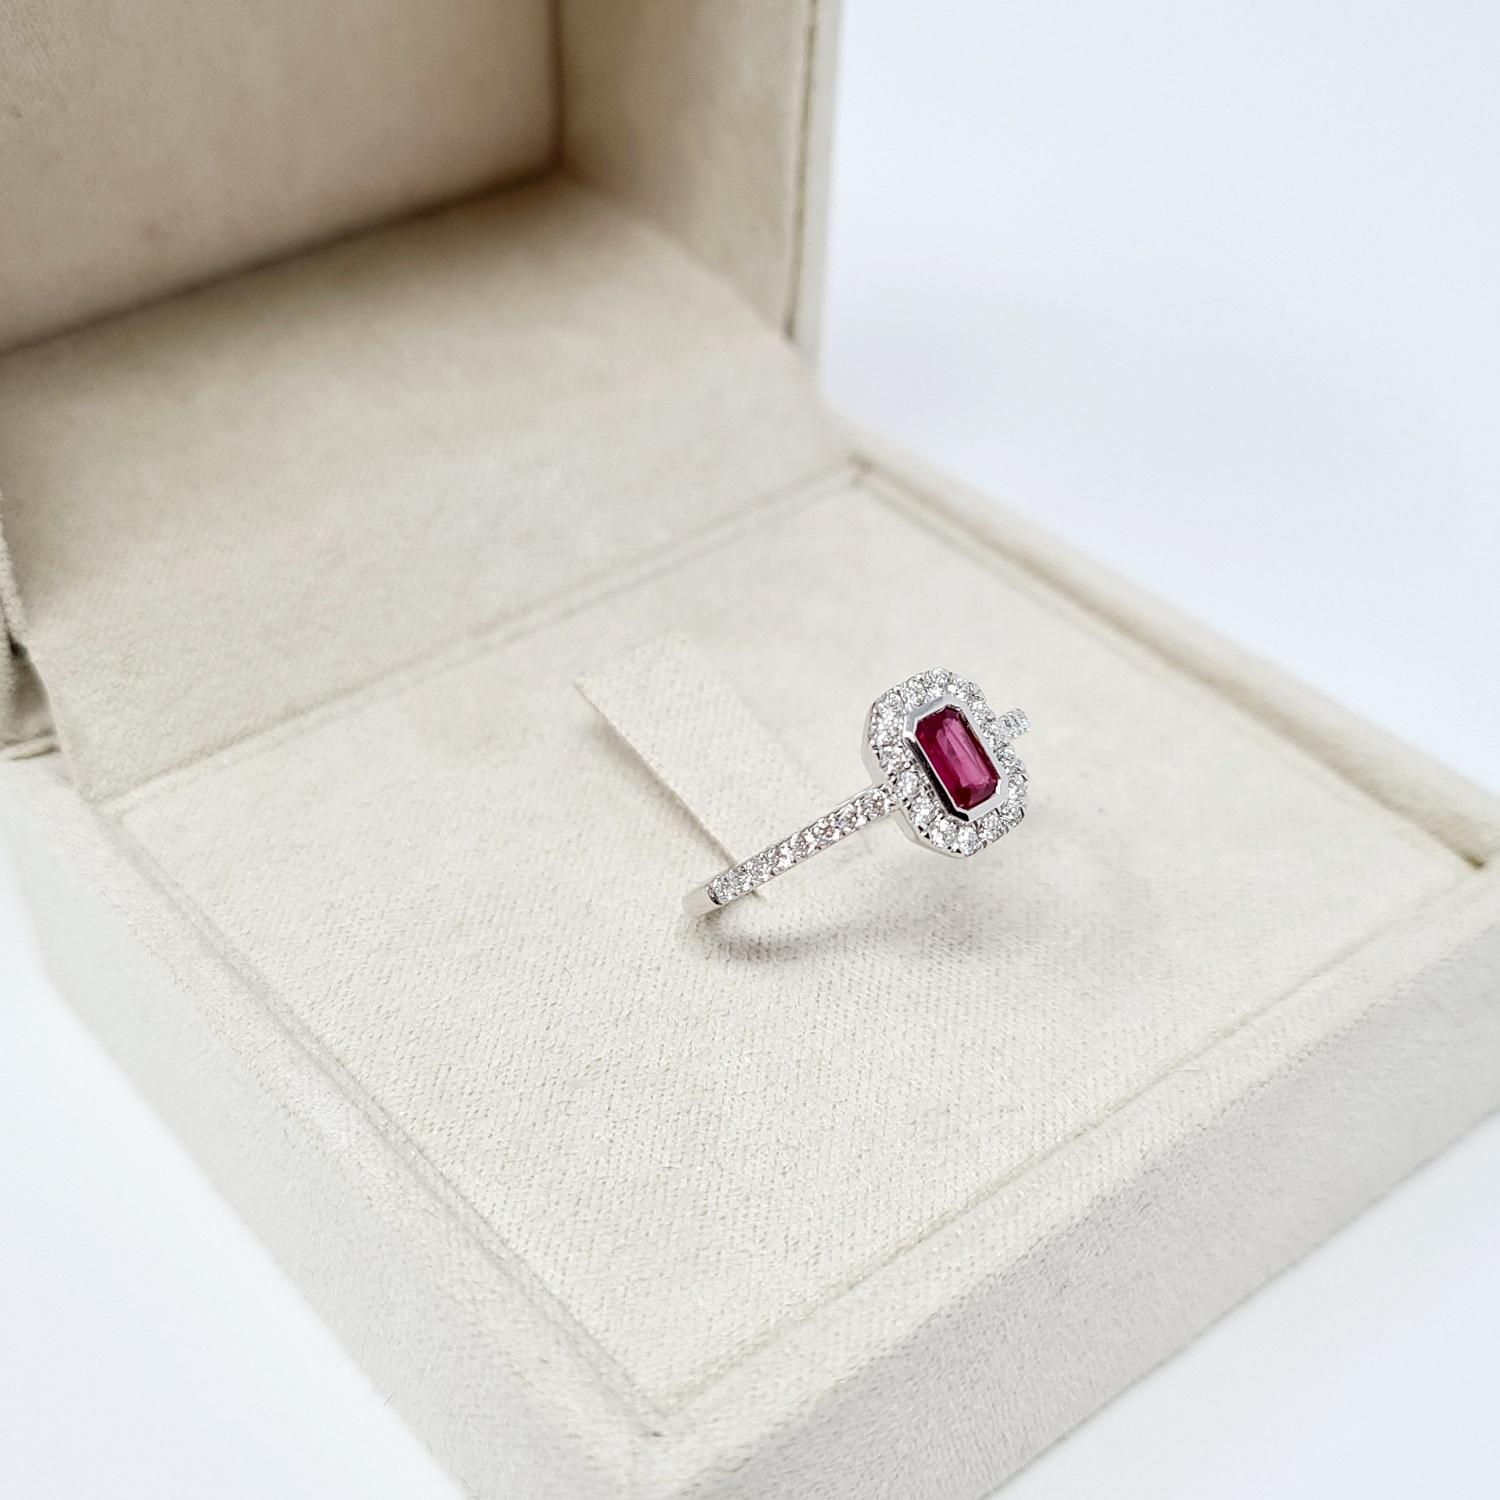 0.28 Ct Ruby 0.31 Ct Diamonds 18kt White Gold Engagement Ring or Solitaire Ring In New Condition For Sale In Bosco Marengo, IT